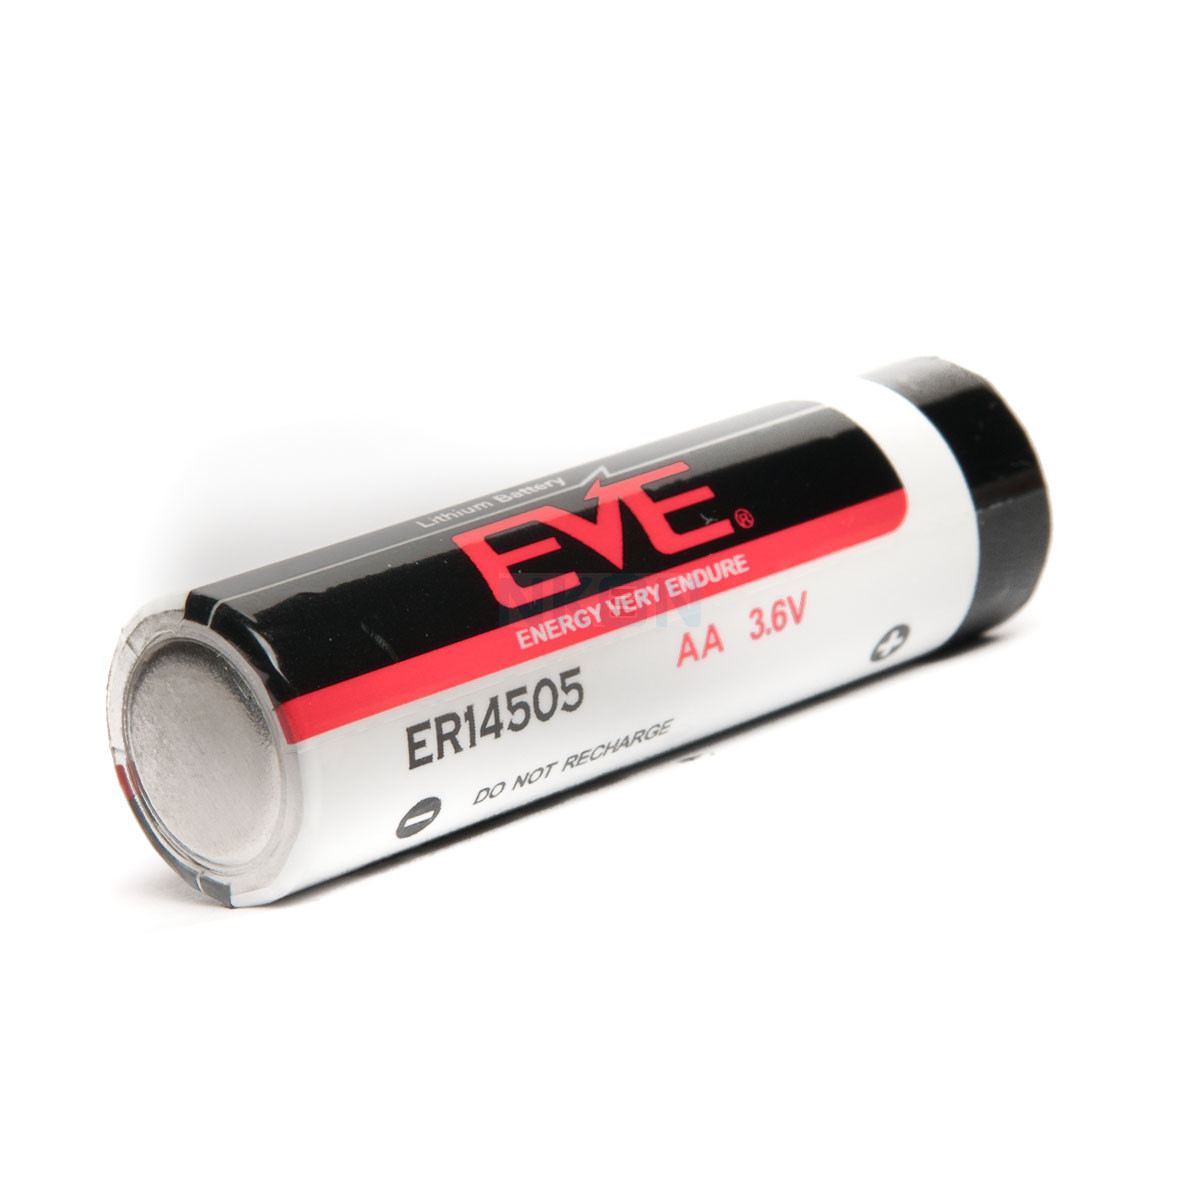 EVE ER14505 S / AA - 3.6V - AA / 14500 - Lithium - Piles jetables